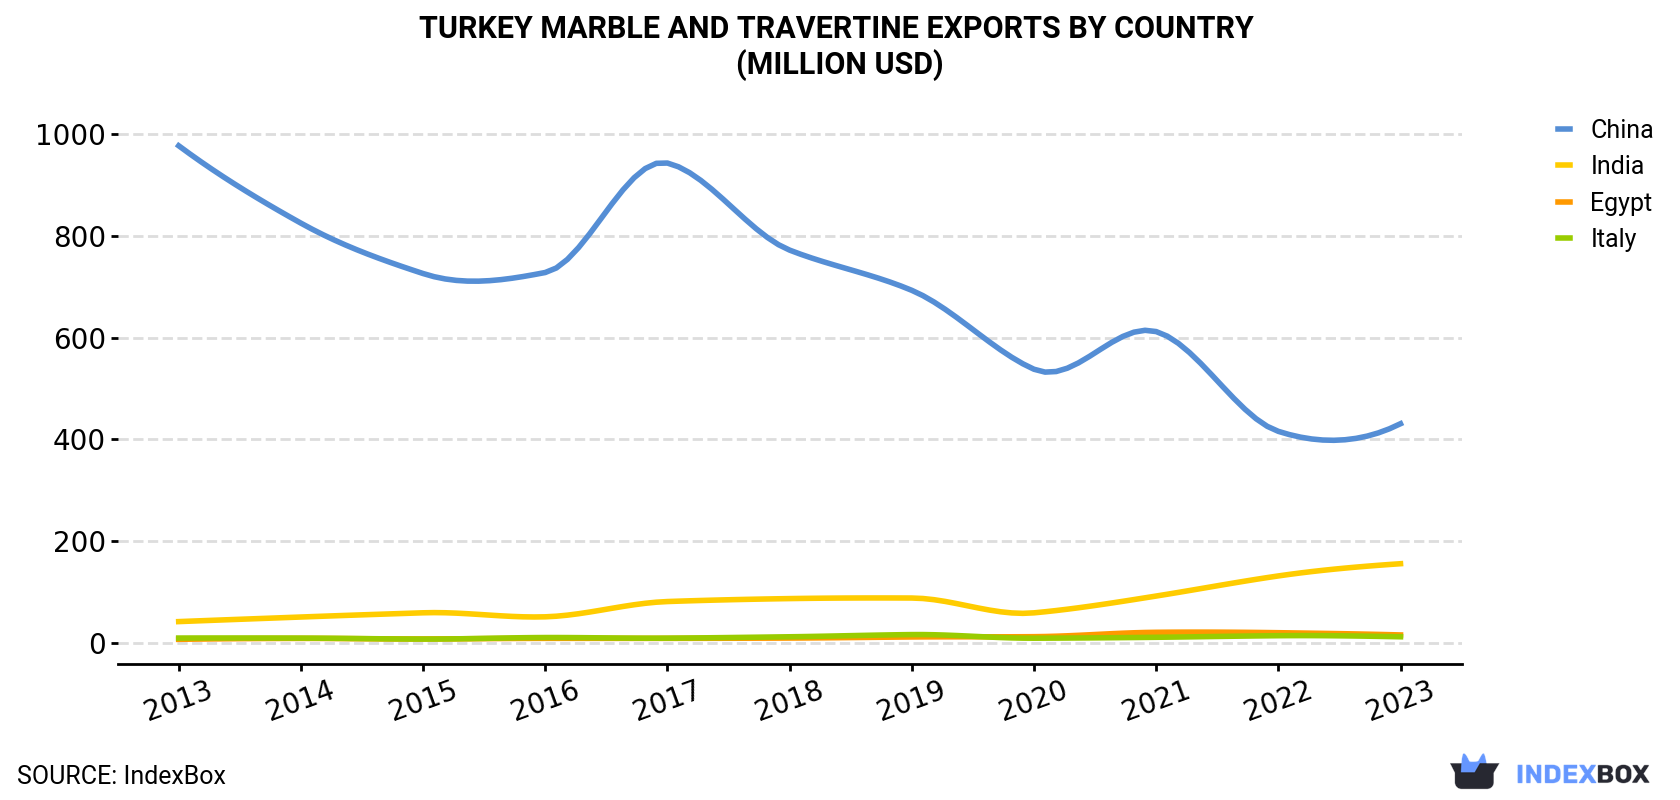 Turkey Marble And Travertine Exports By Country (Million USD)